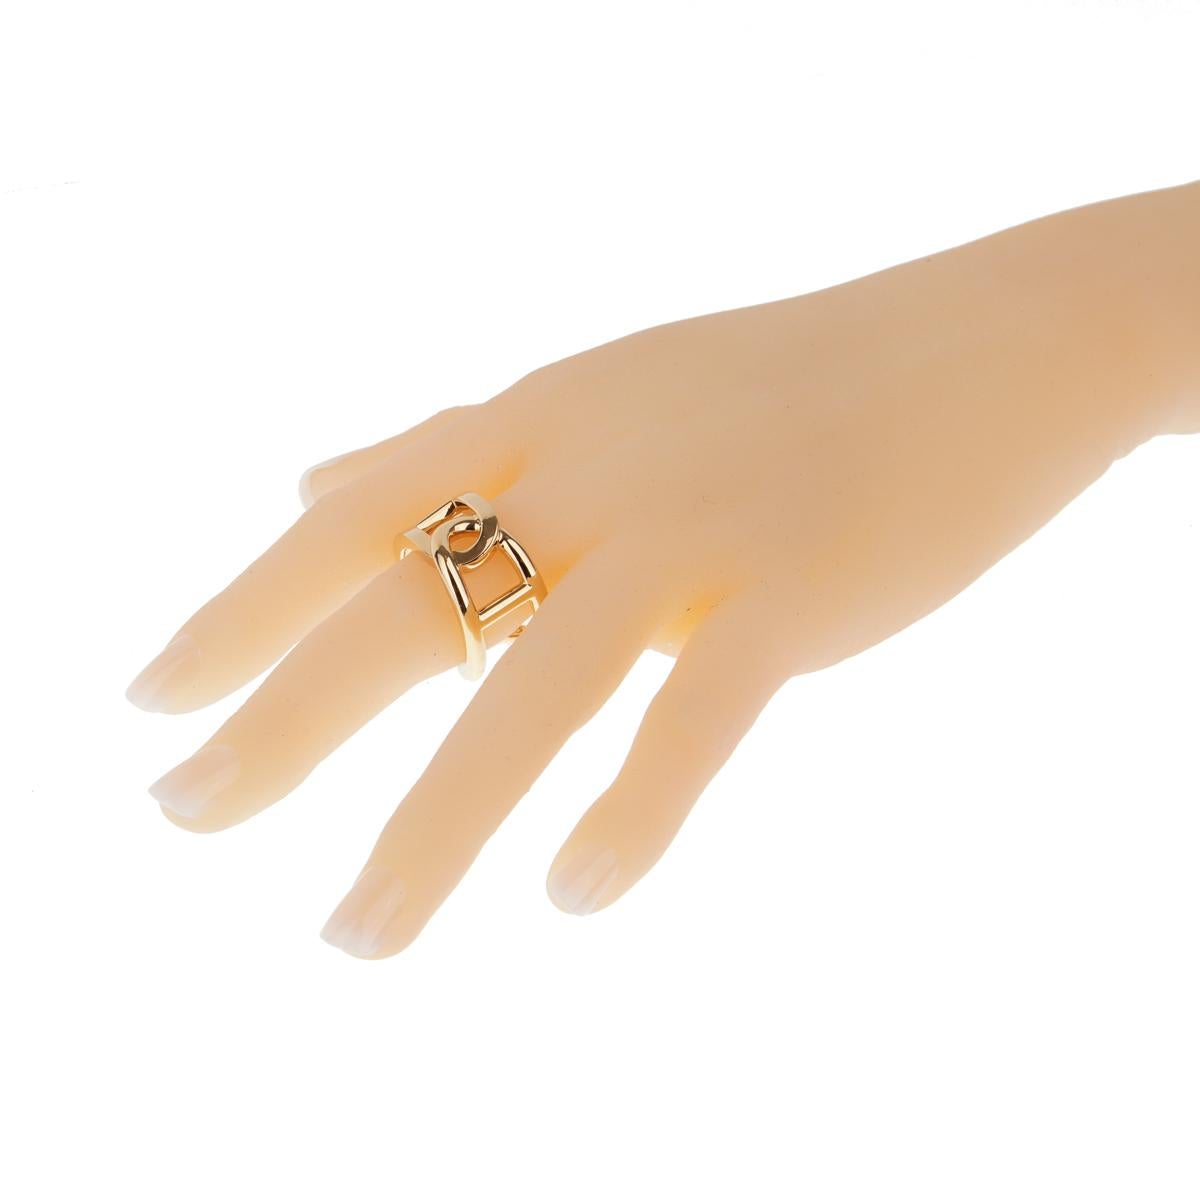 Own a piece of Hermes history with this classic Chaine d'Ancre gold ring in subtle, 18kt yellow gold. This unmistakable motif combines classic H designs in a wide band.

Size 9 1/2